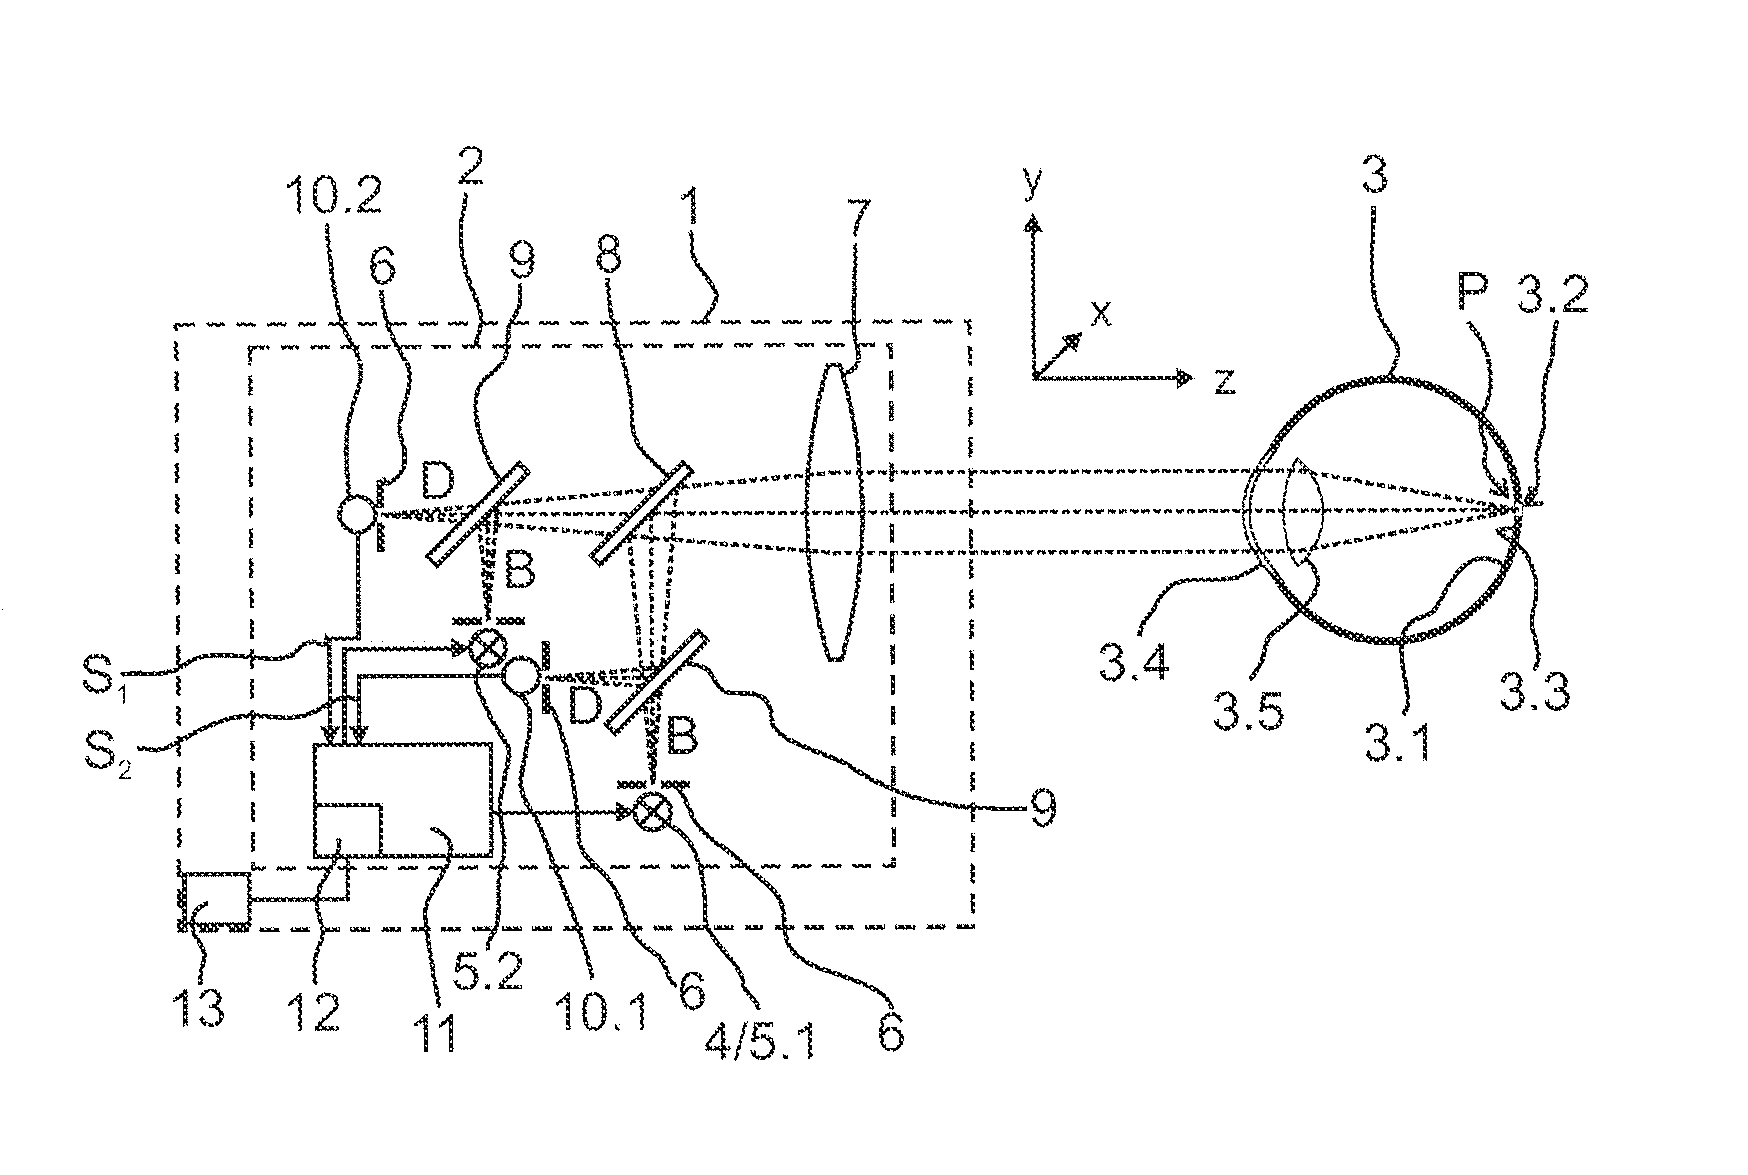 Fixation control device and method for controlling the fixation of an eye